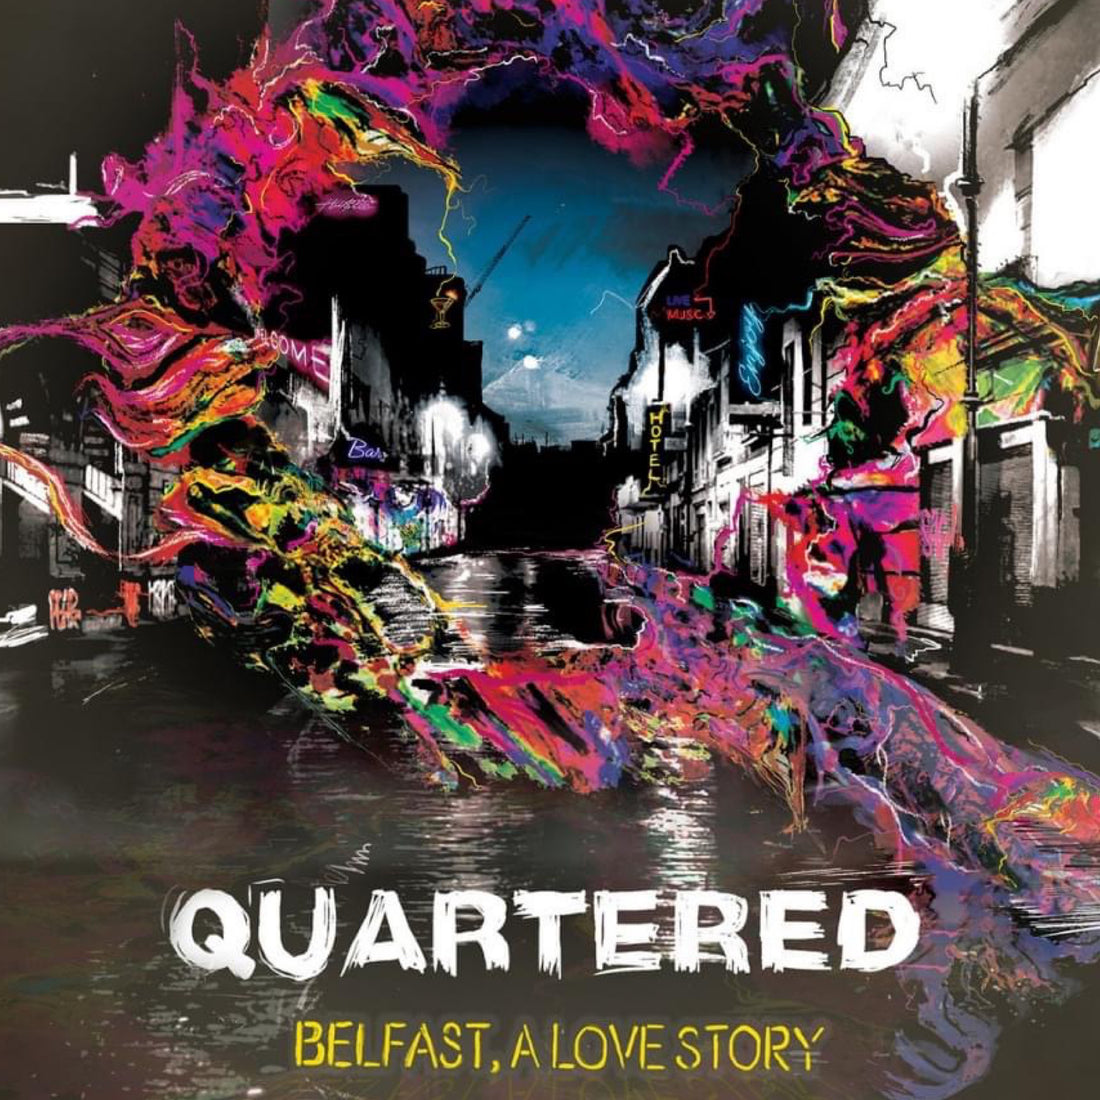 Quartered: Explore the queer experience of space in our city